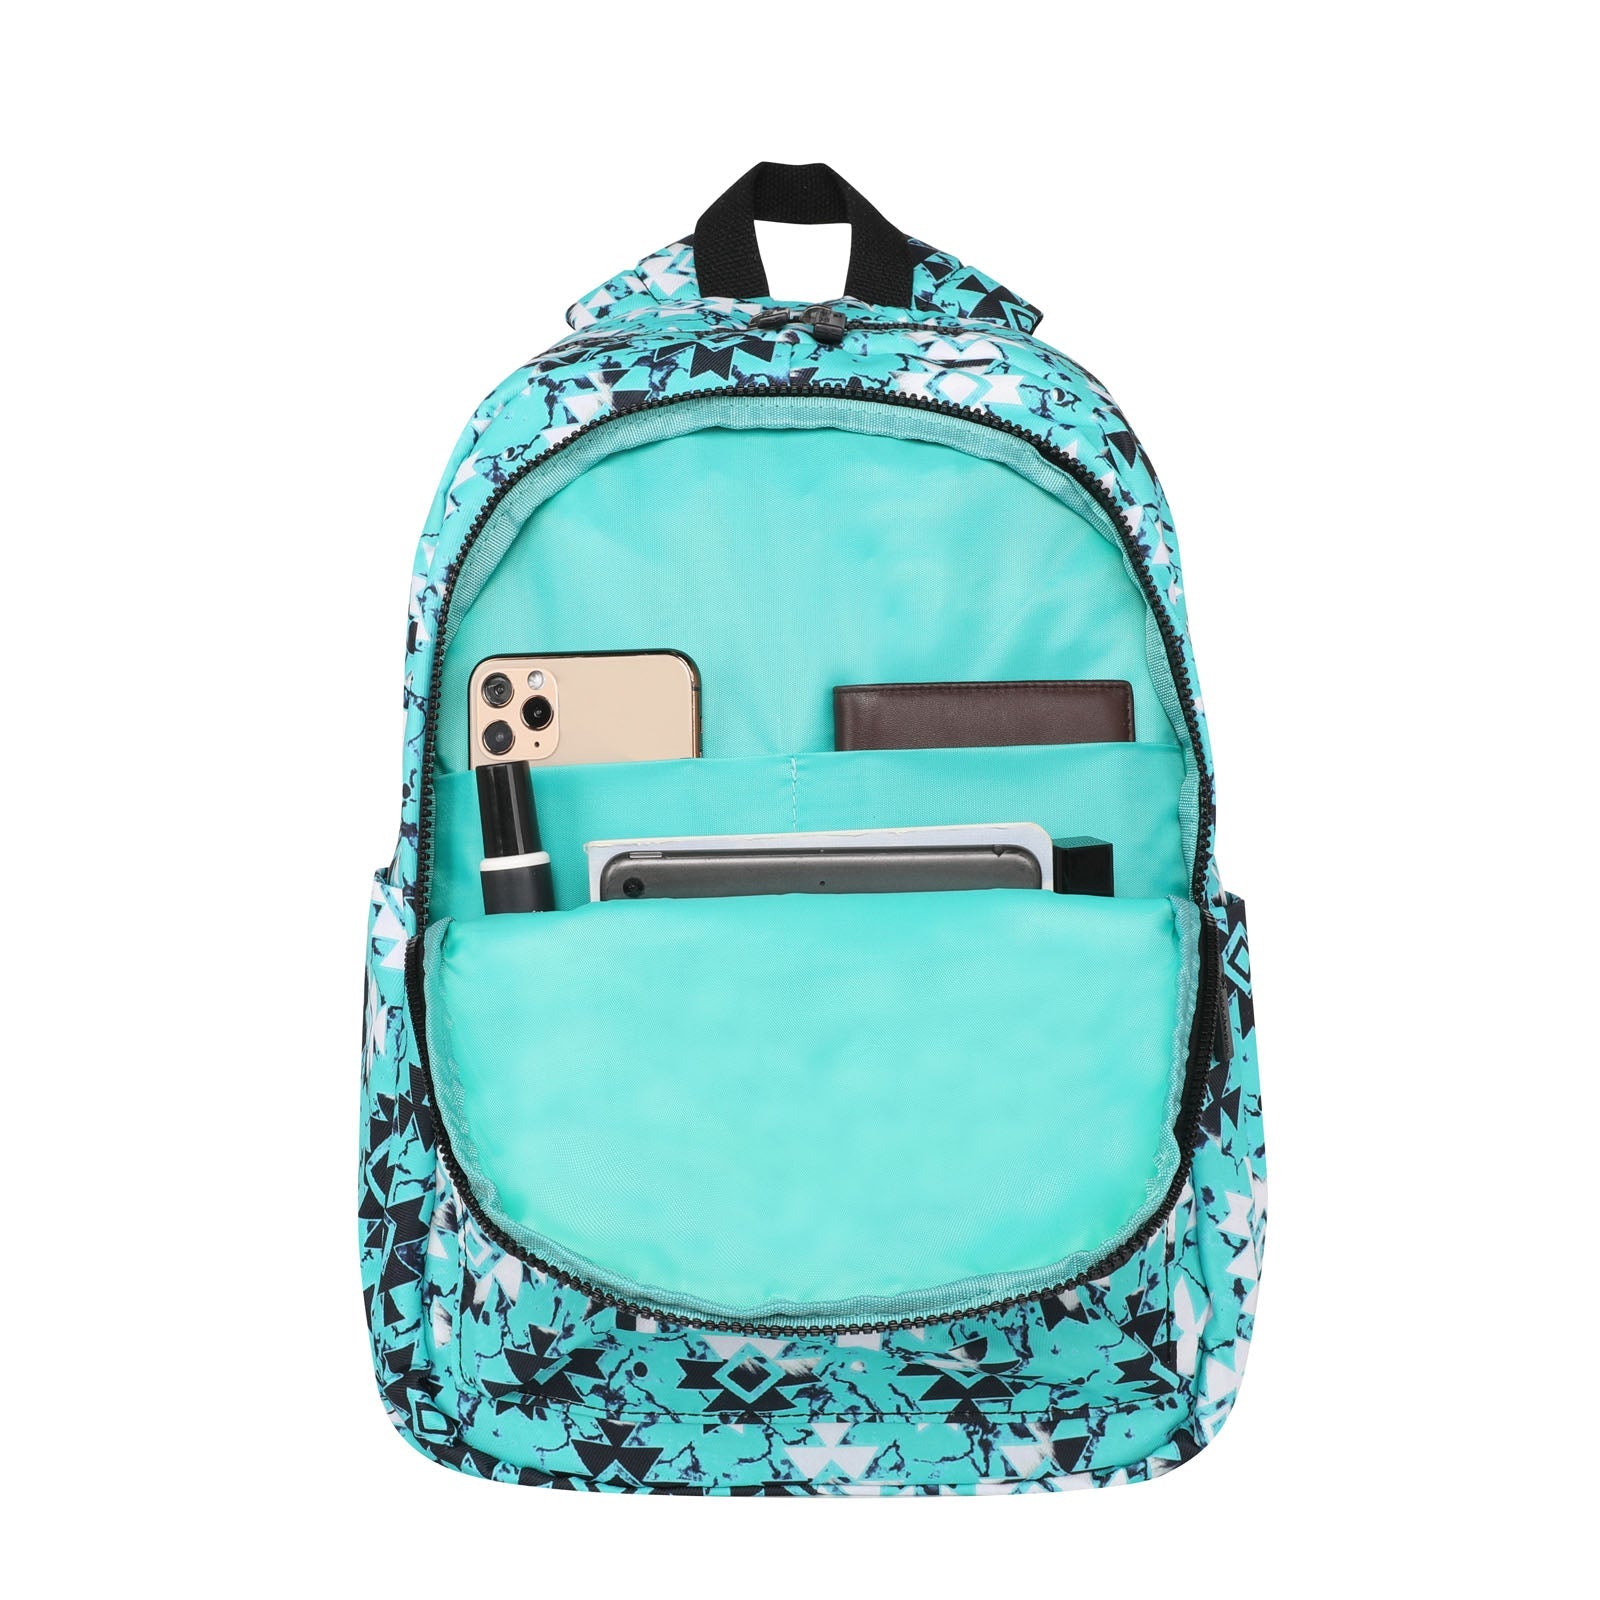 Montana West Turquoise Aztec Print Backpack - Cowgirl Wear